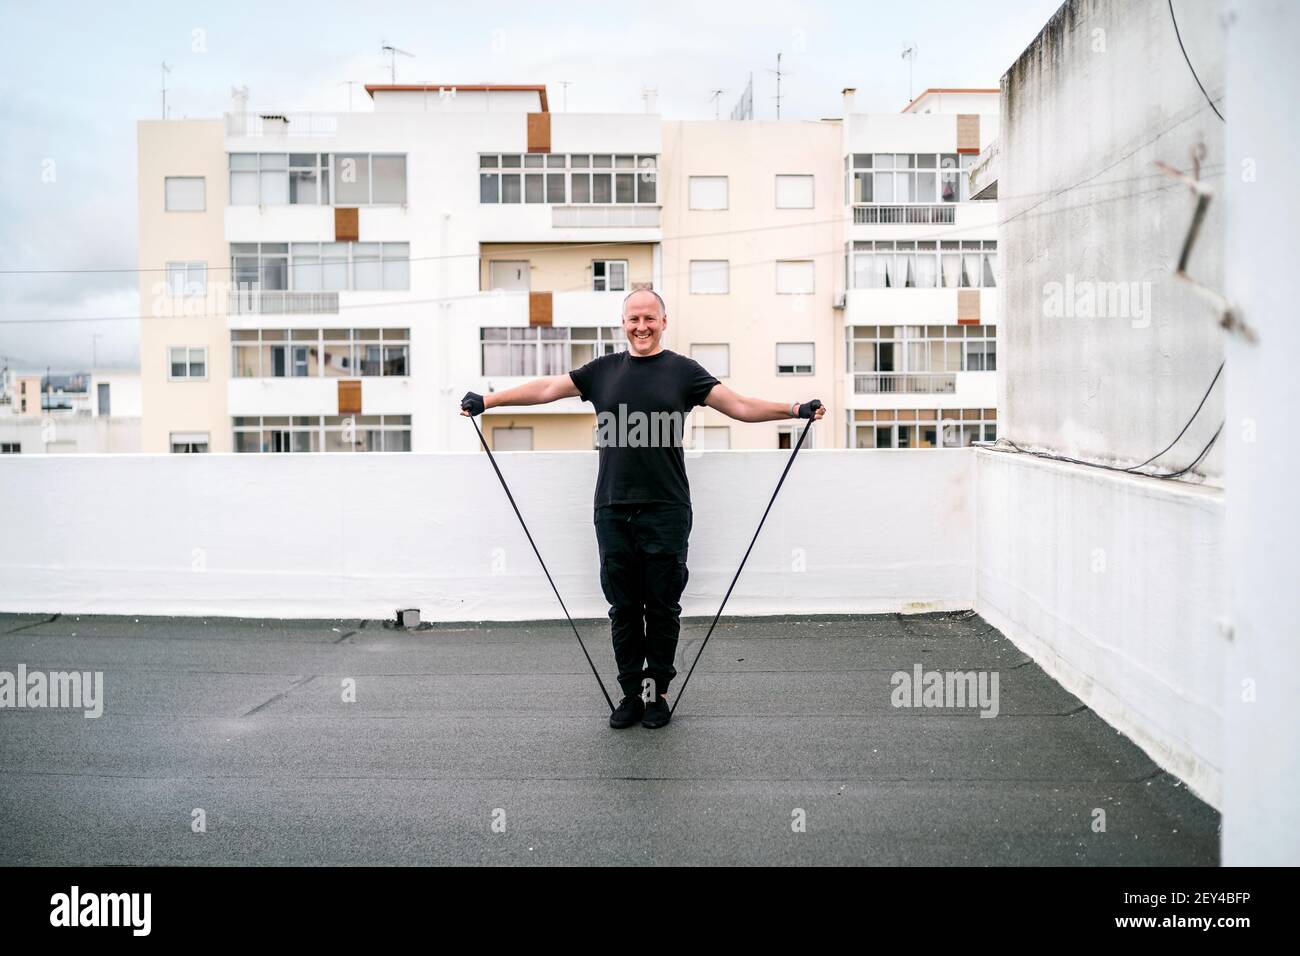 A man exercising with gum on the rooftop during self-confinement caused by pandemic Stock Photo